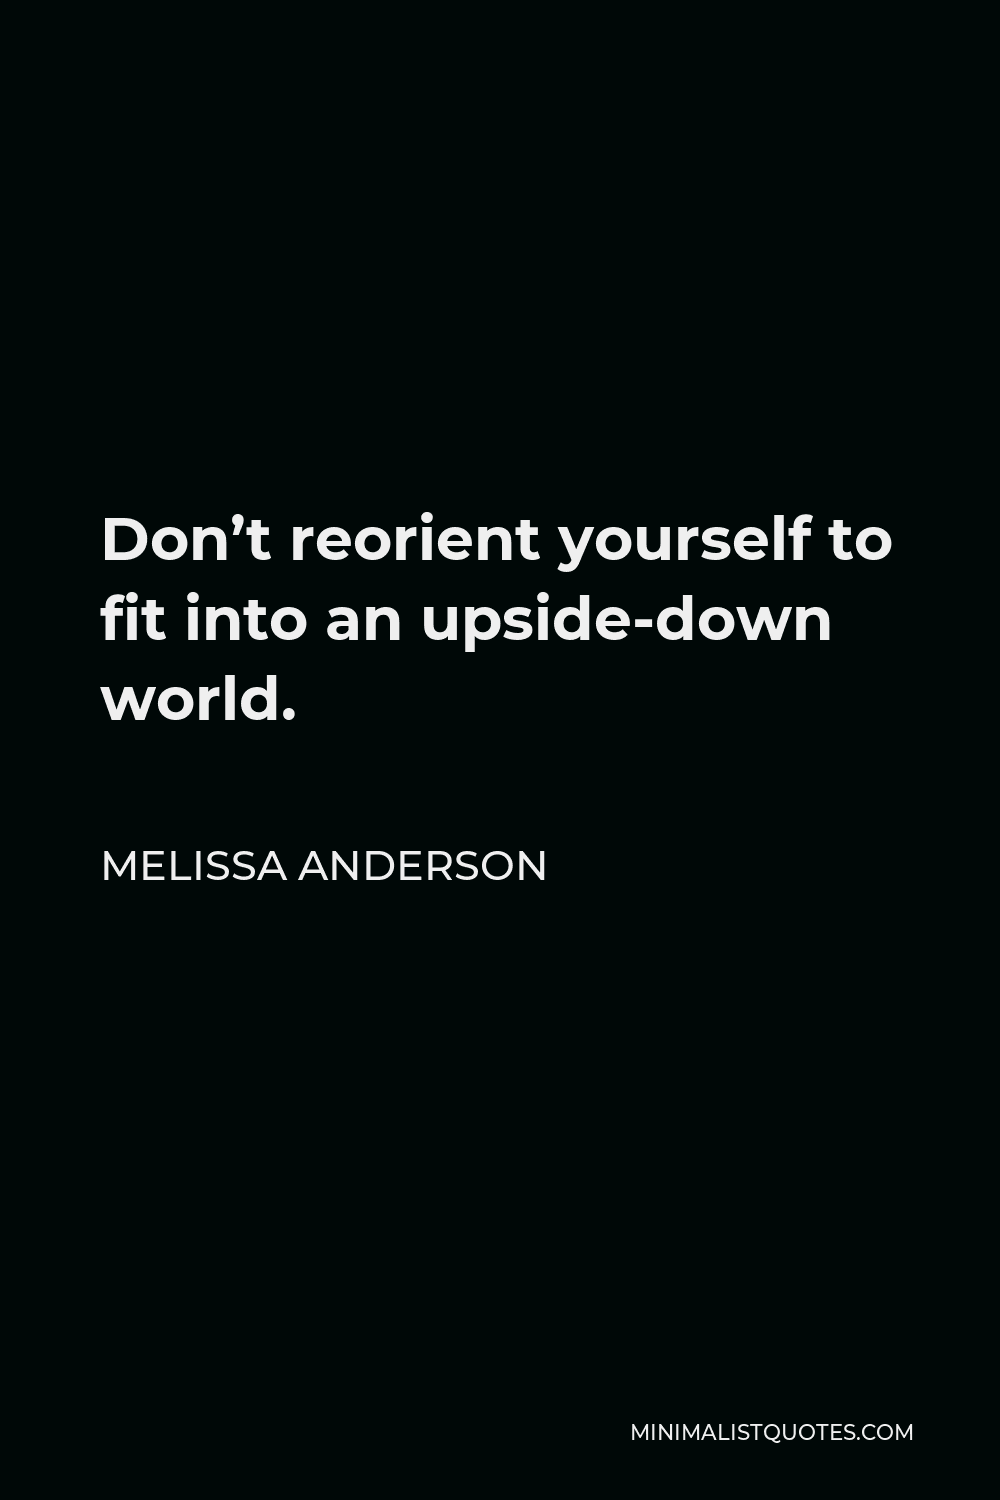 Melissa Anderson Quote - Don’t reorient yourself to fit into an upside-down world.